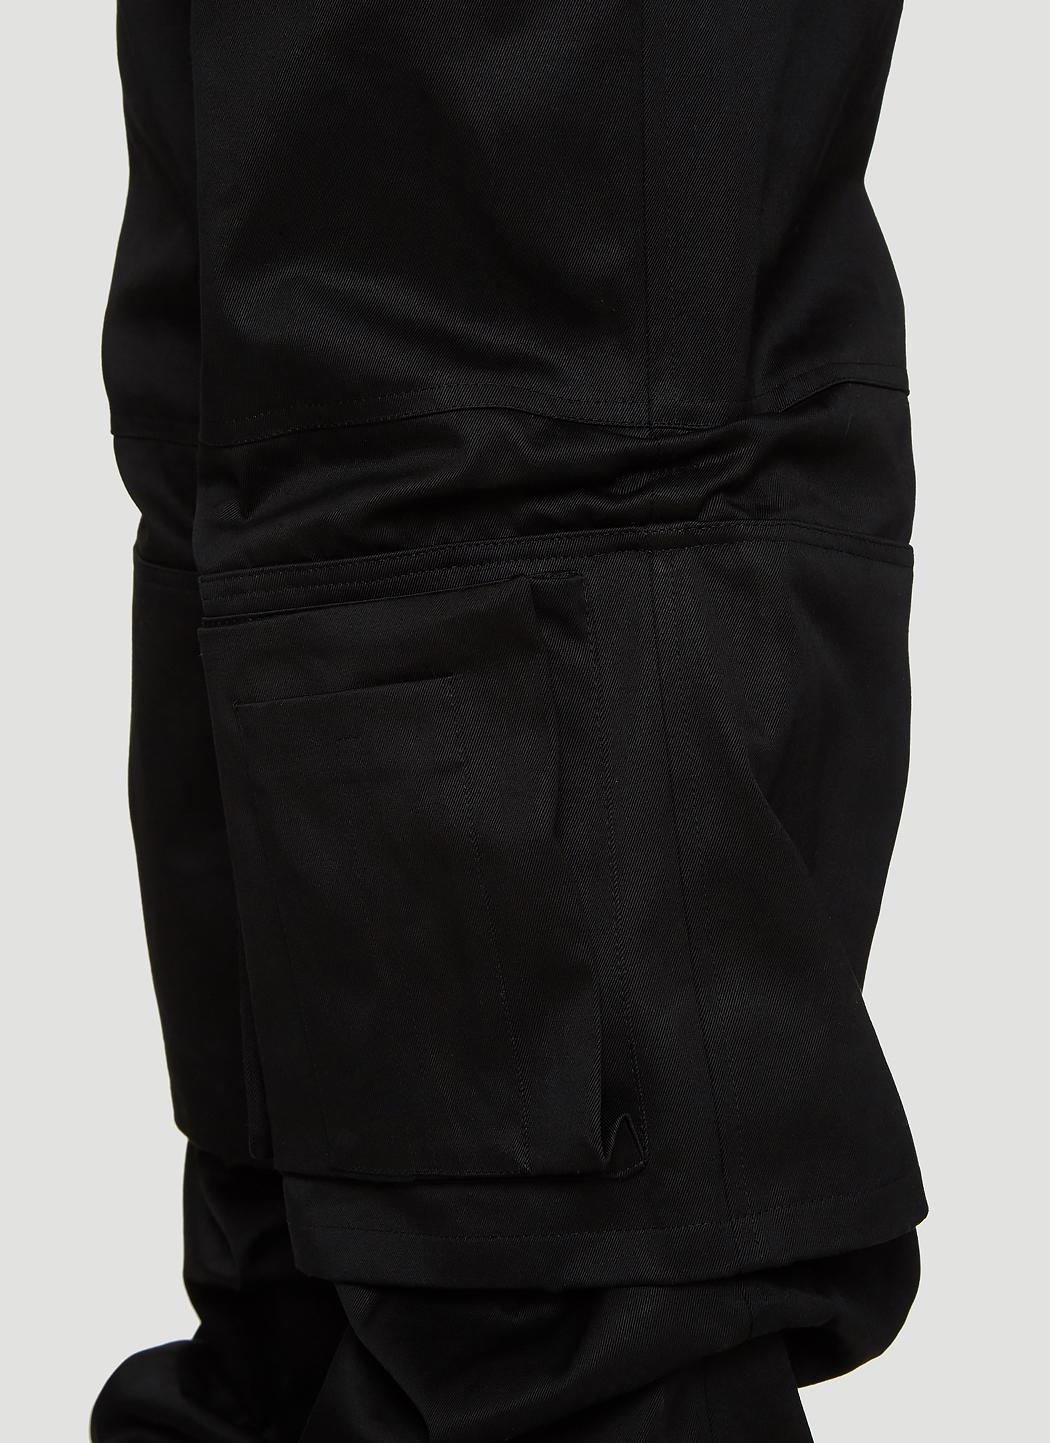 Raf Simons Cotton Wide Space Pants In Black for Men - Lyst